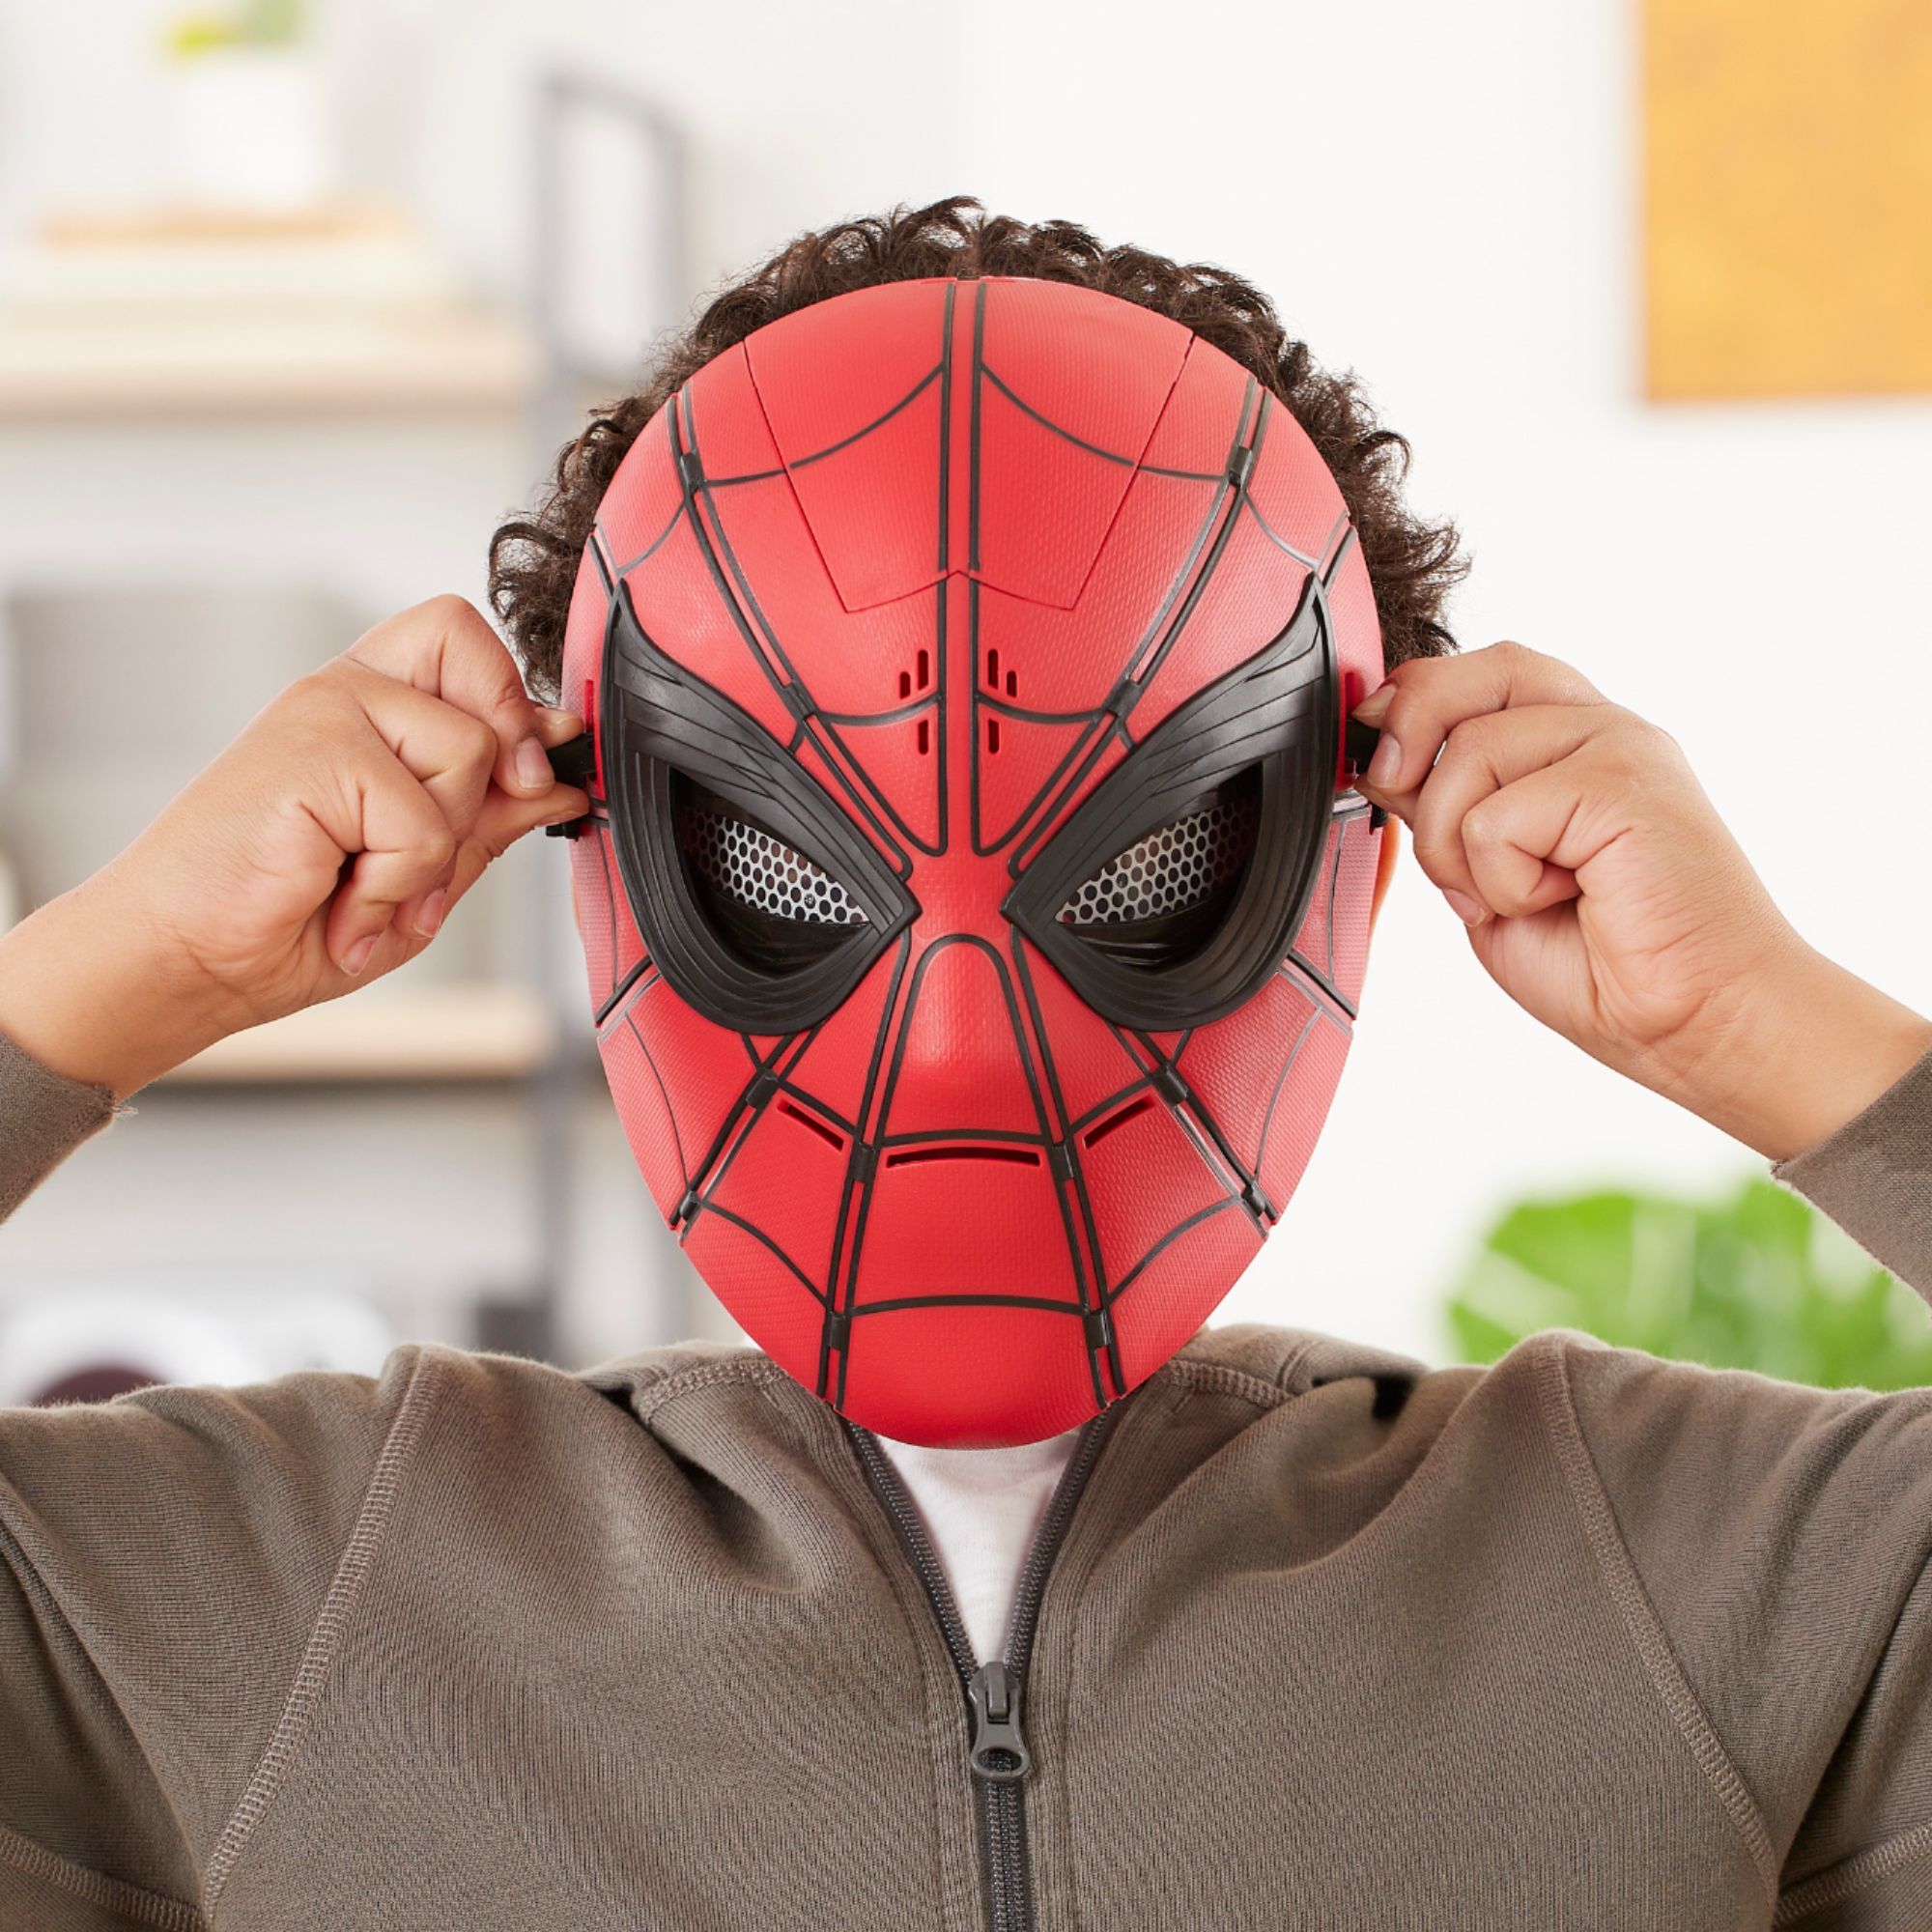 Spiderman far from home Toy Mask